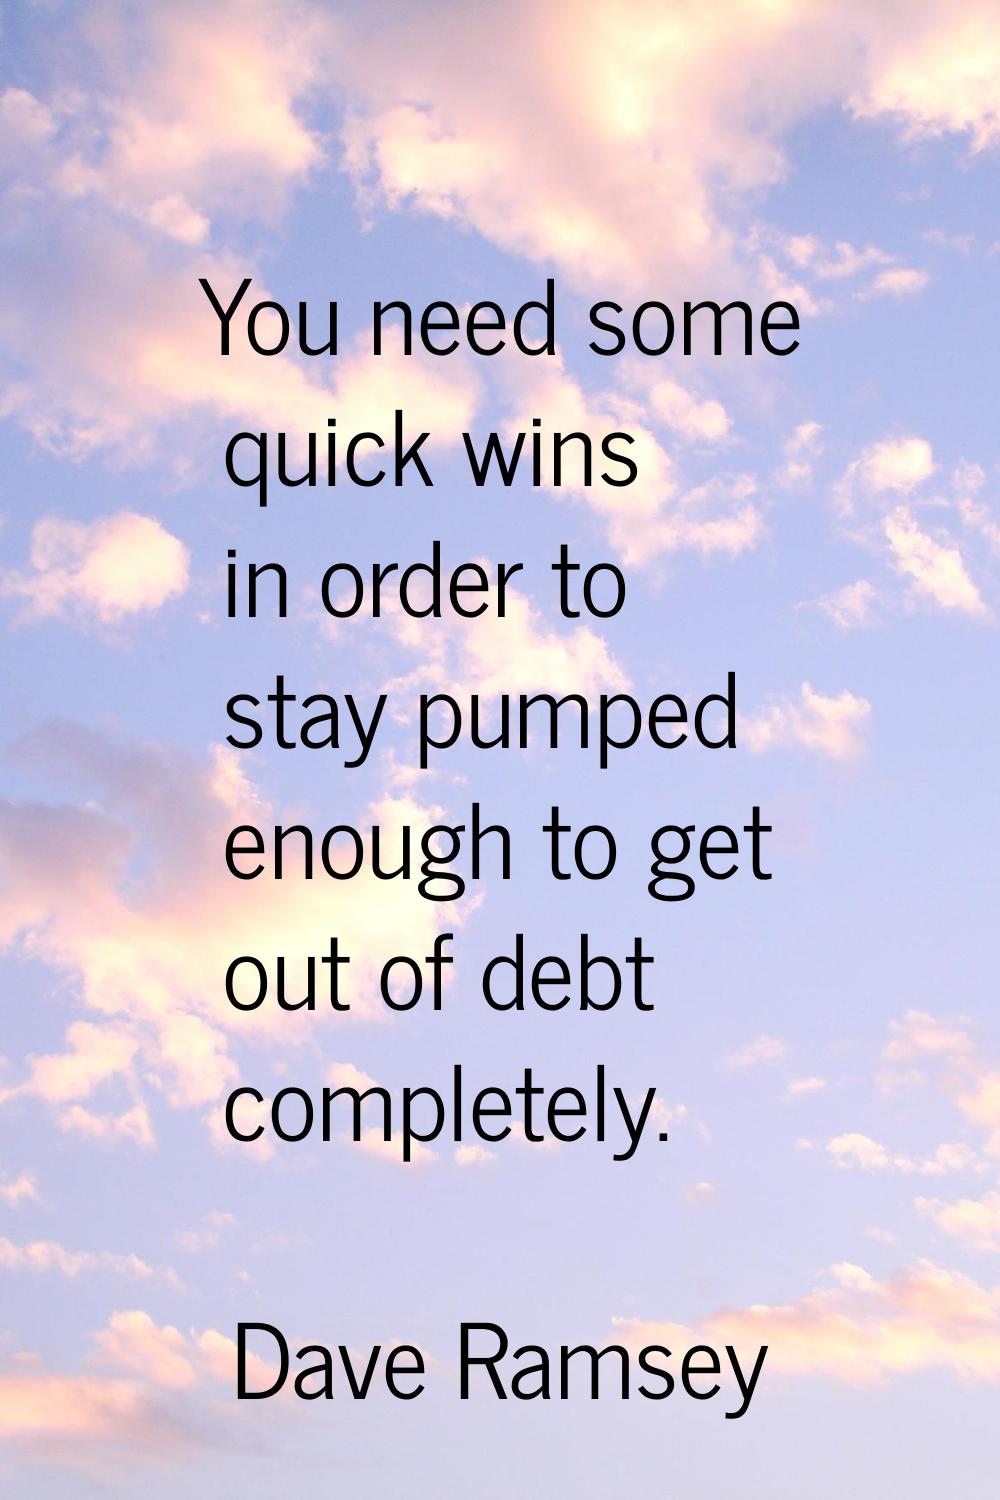 You need some quick wins in order to stay pumped enough to get out of debt completely.